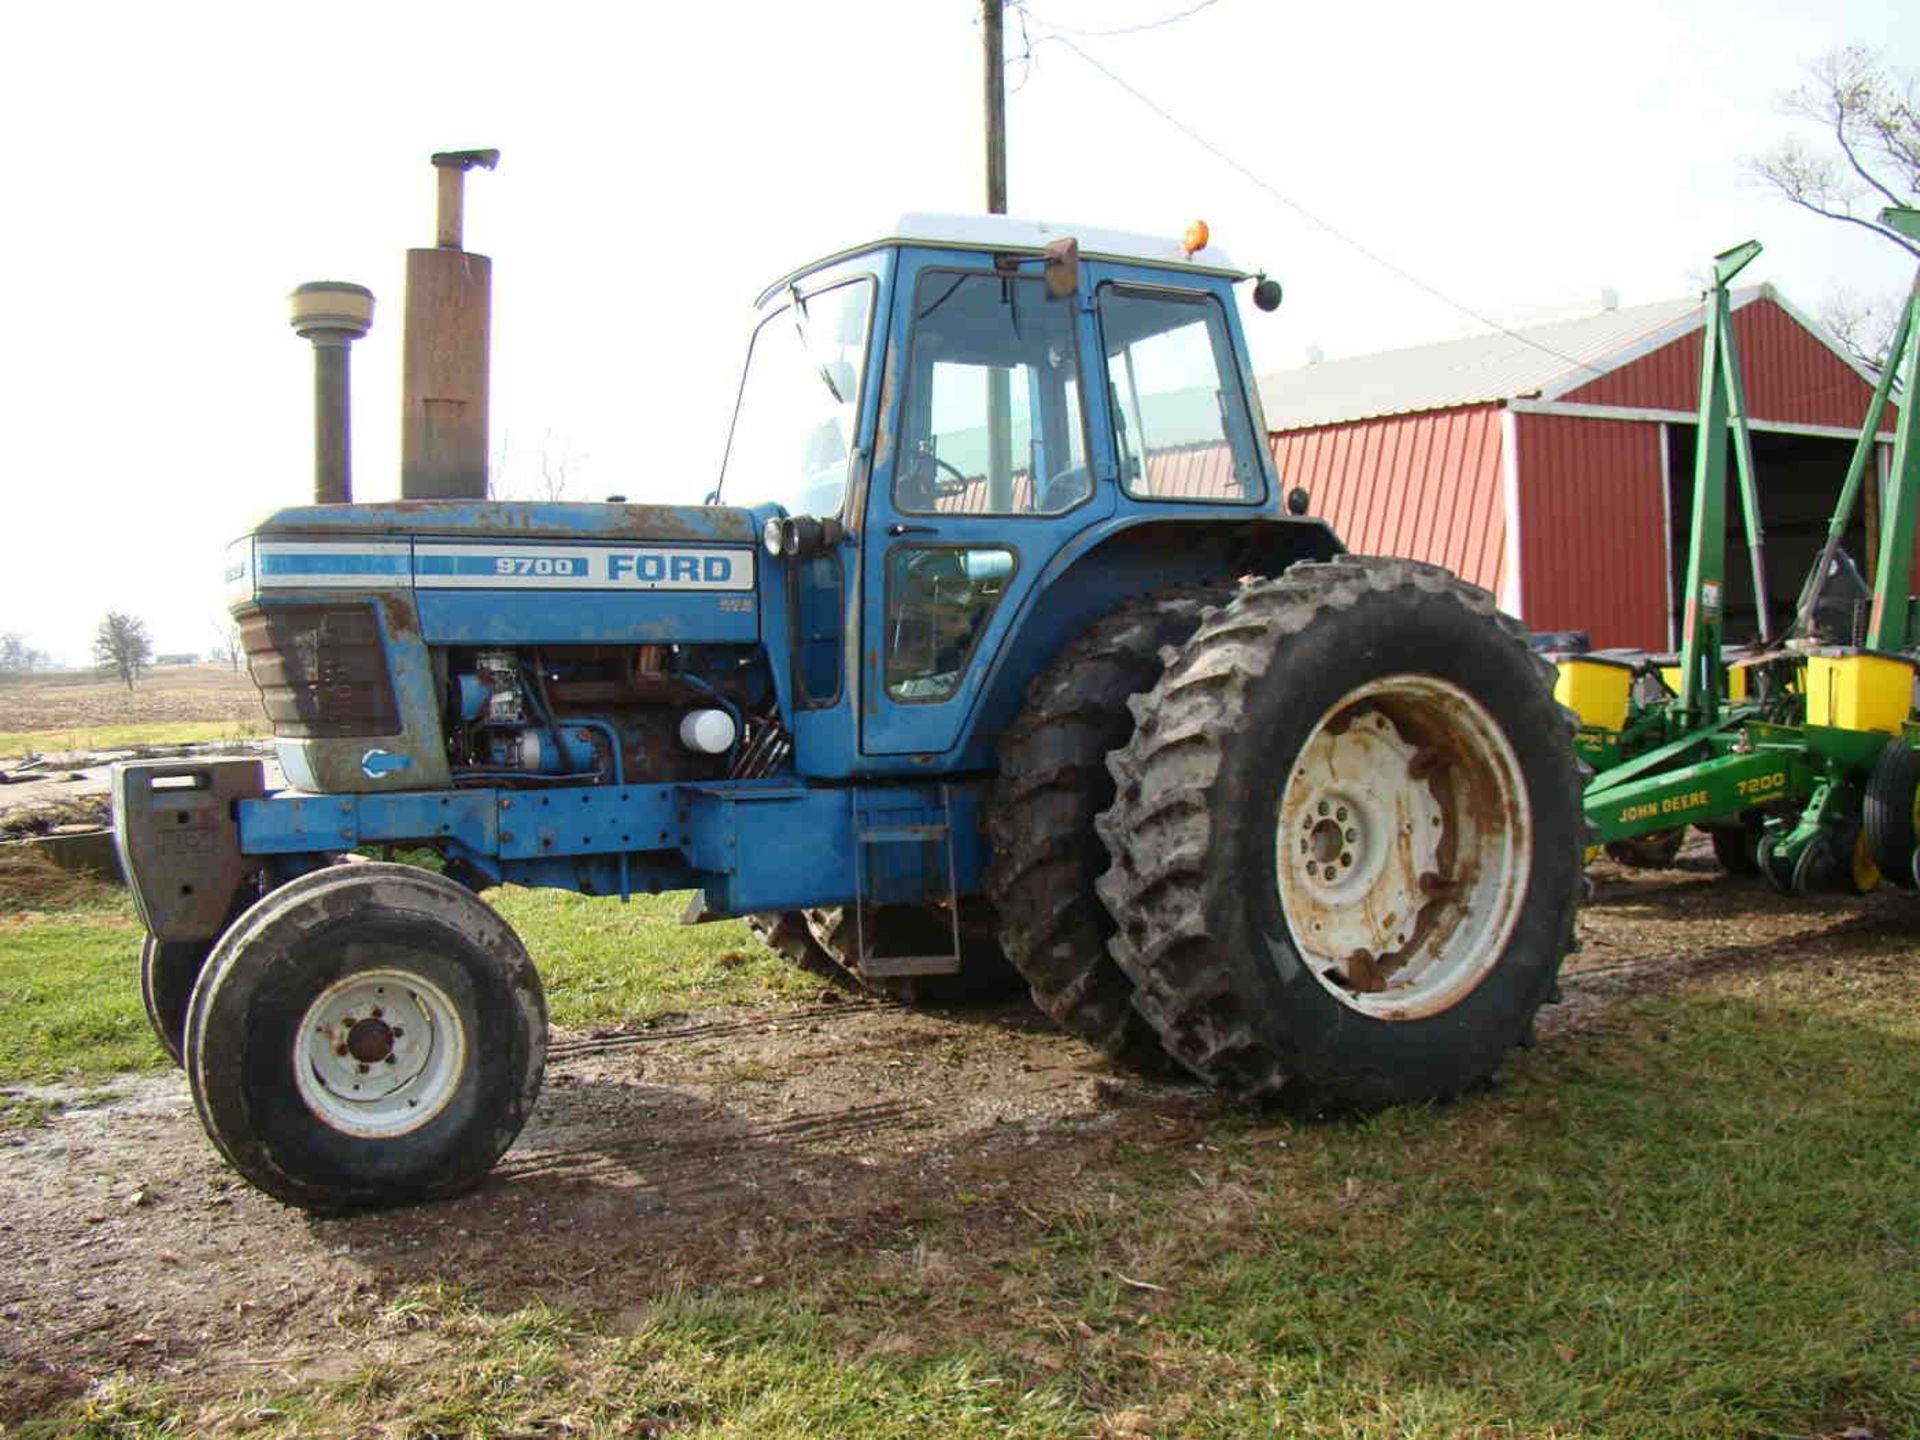 1978 Ford 9700 2wd tractor 8,272 hrs, w/duals Firestone 18.4-38, serial H2577B - Image 2 of 9